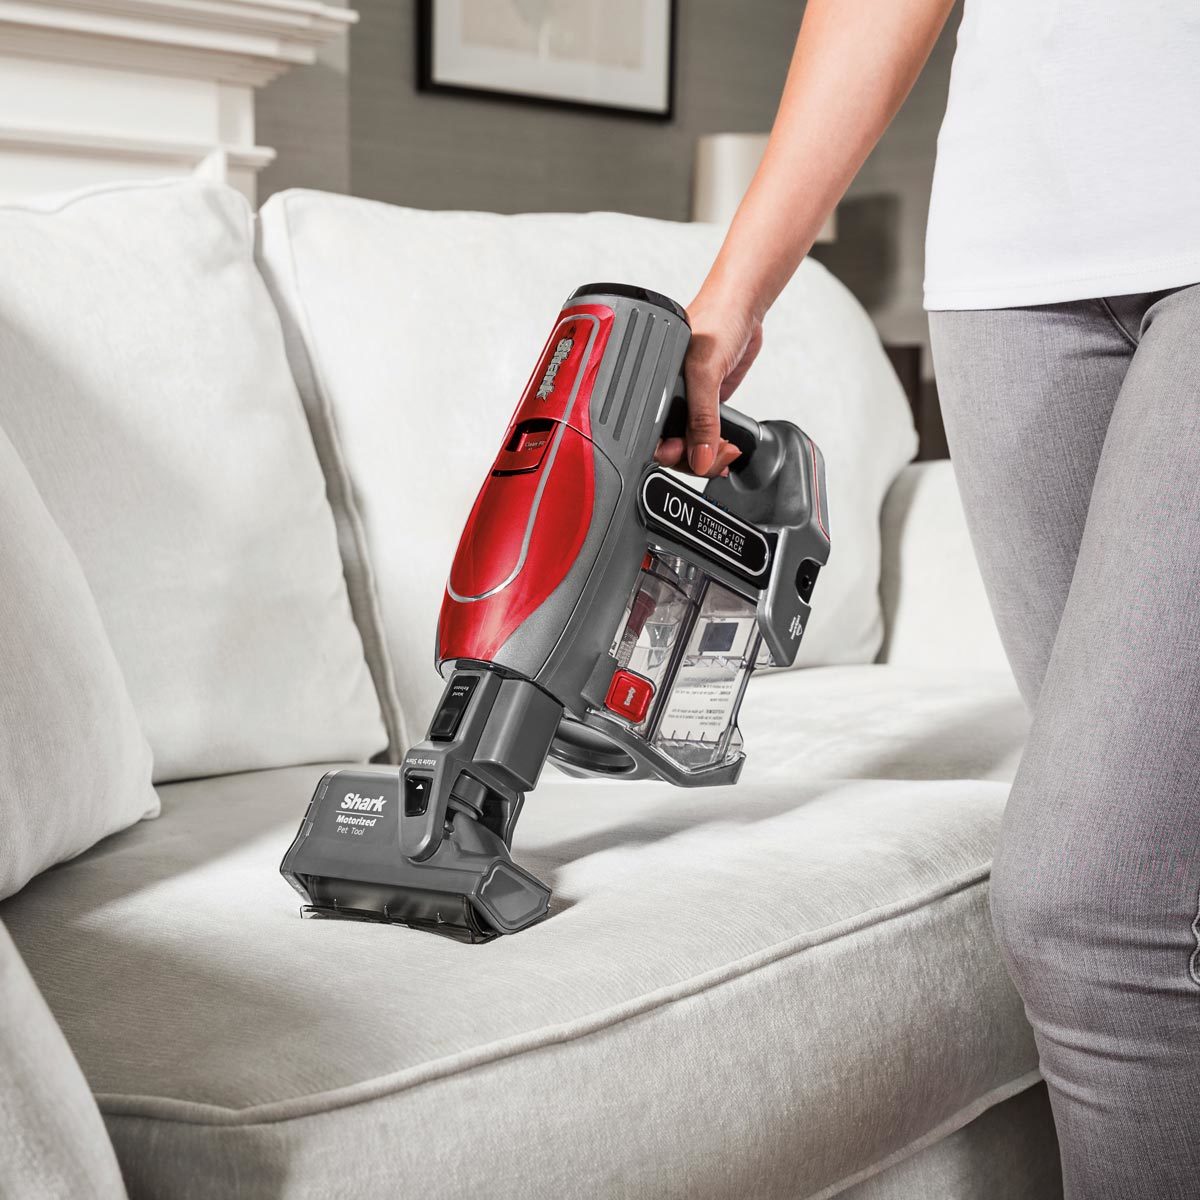 Shark DuoClean Cordless Stick Vacuum with 2 Batteries, IF250UKCO